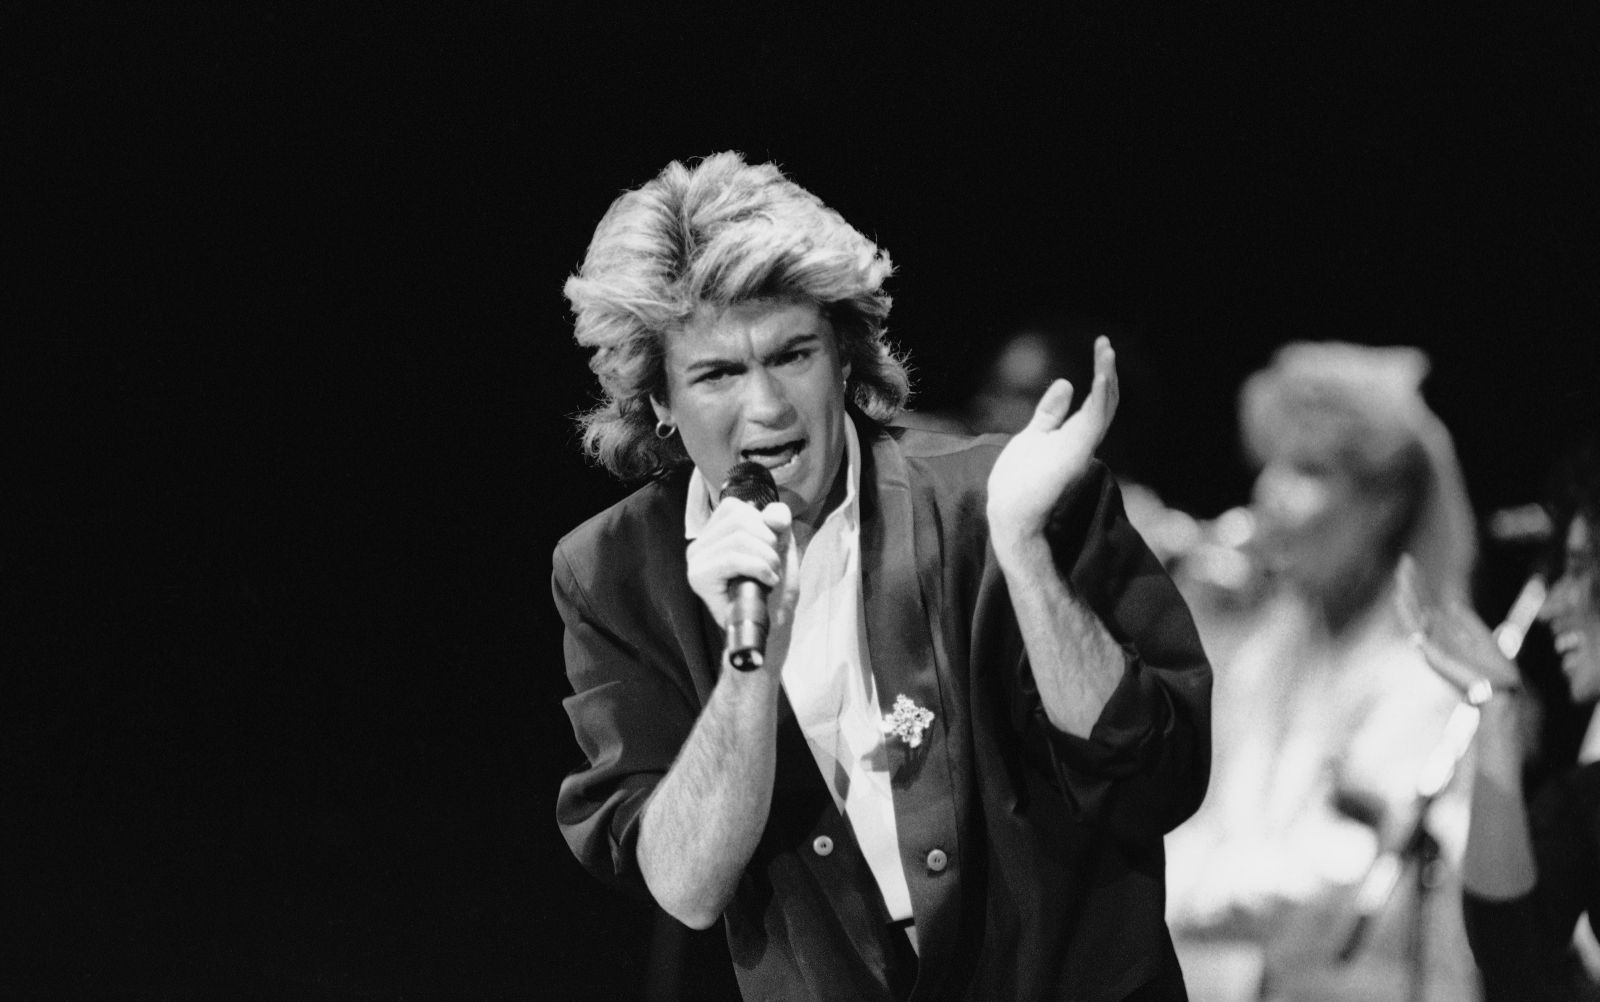 Wham! singer George Michael performs for a capacity crowd in Peking in China's first big-name rock concert, April 7, 1985. The group's music has been officially labeled "healthy" in China's changing society, where Western pop music was considered banal and filthy. (AP Photo/Neal Ulevich)